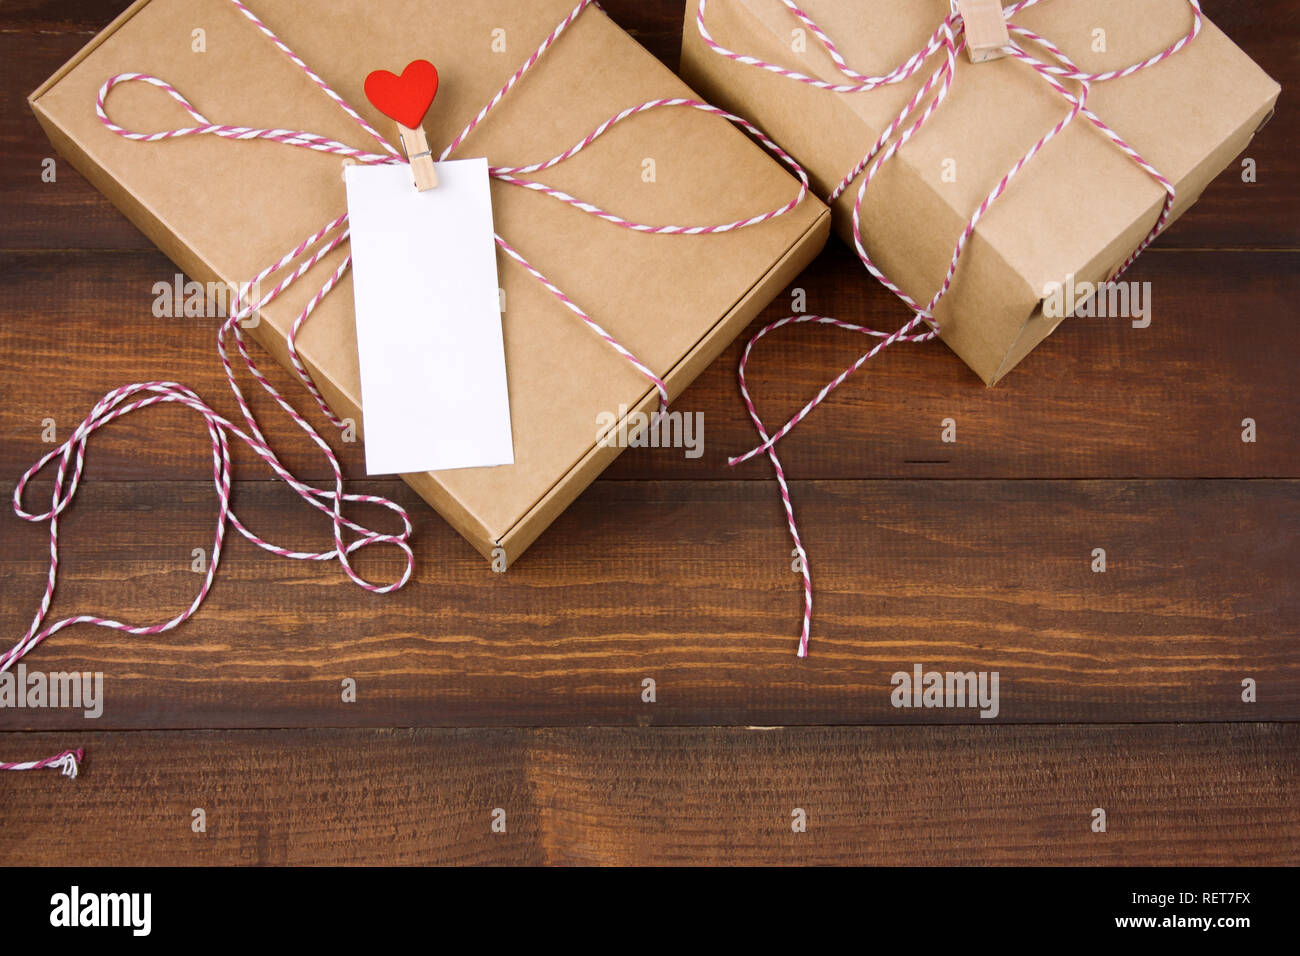 top view cardboard box with clothpin with red heart and empty white label with place for text on a brown wooden background Stock Photo